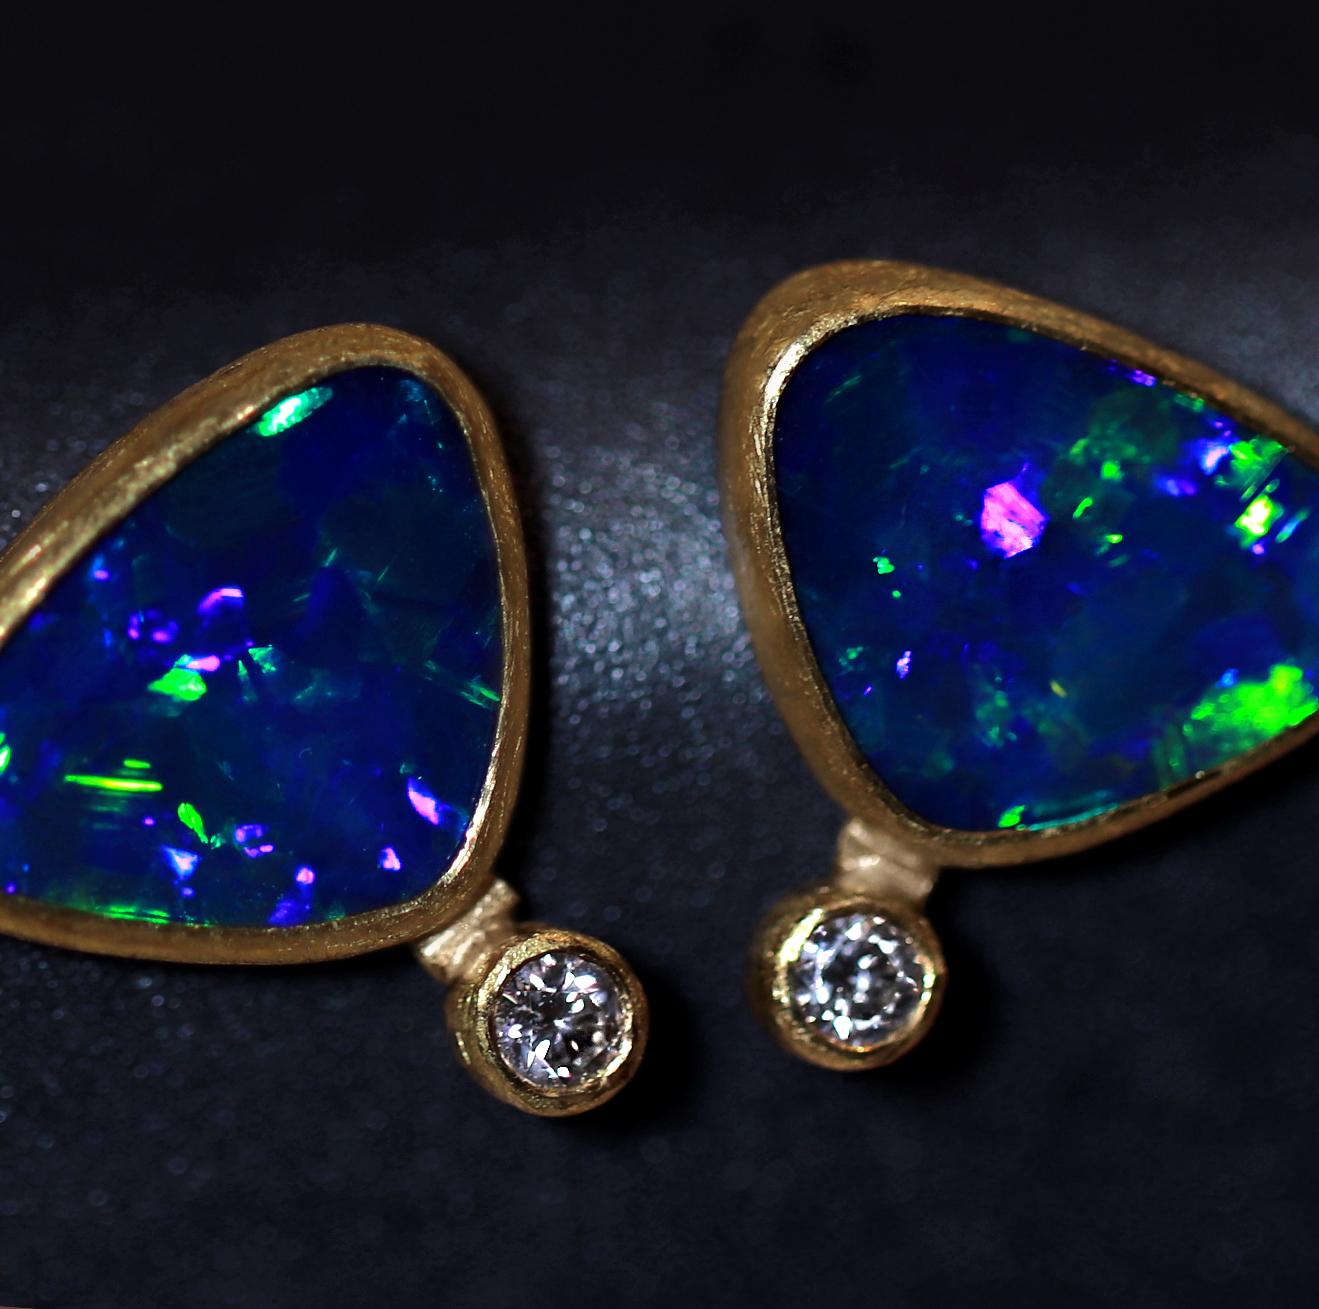 Electric Flash Stud Earrings handcrafted by acclaimed jewelry maker Petra Class featuring two matched Australian very deep blue opal doublets with strong electric neon green, blue, and violet flash, bezel-set in the artist's signature-finished 22k